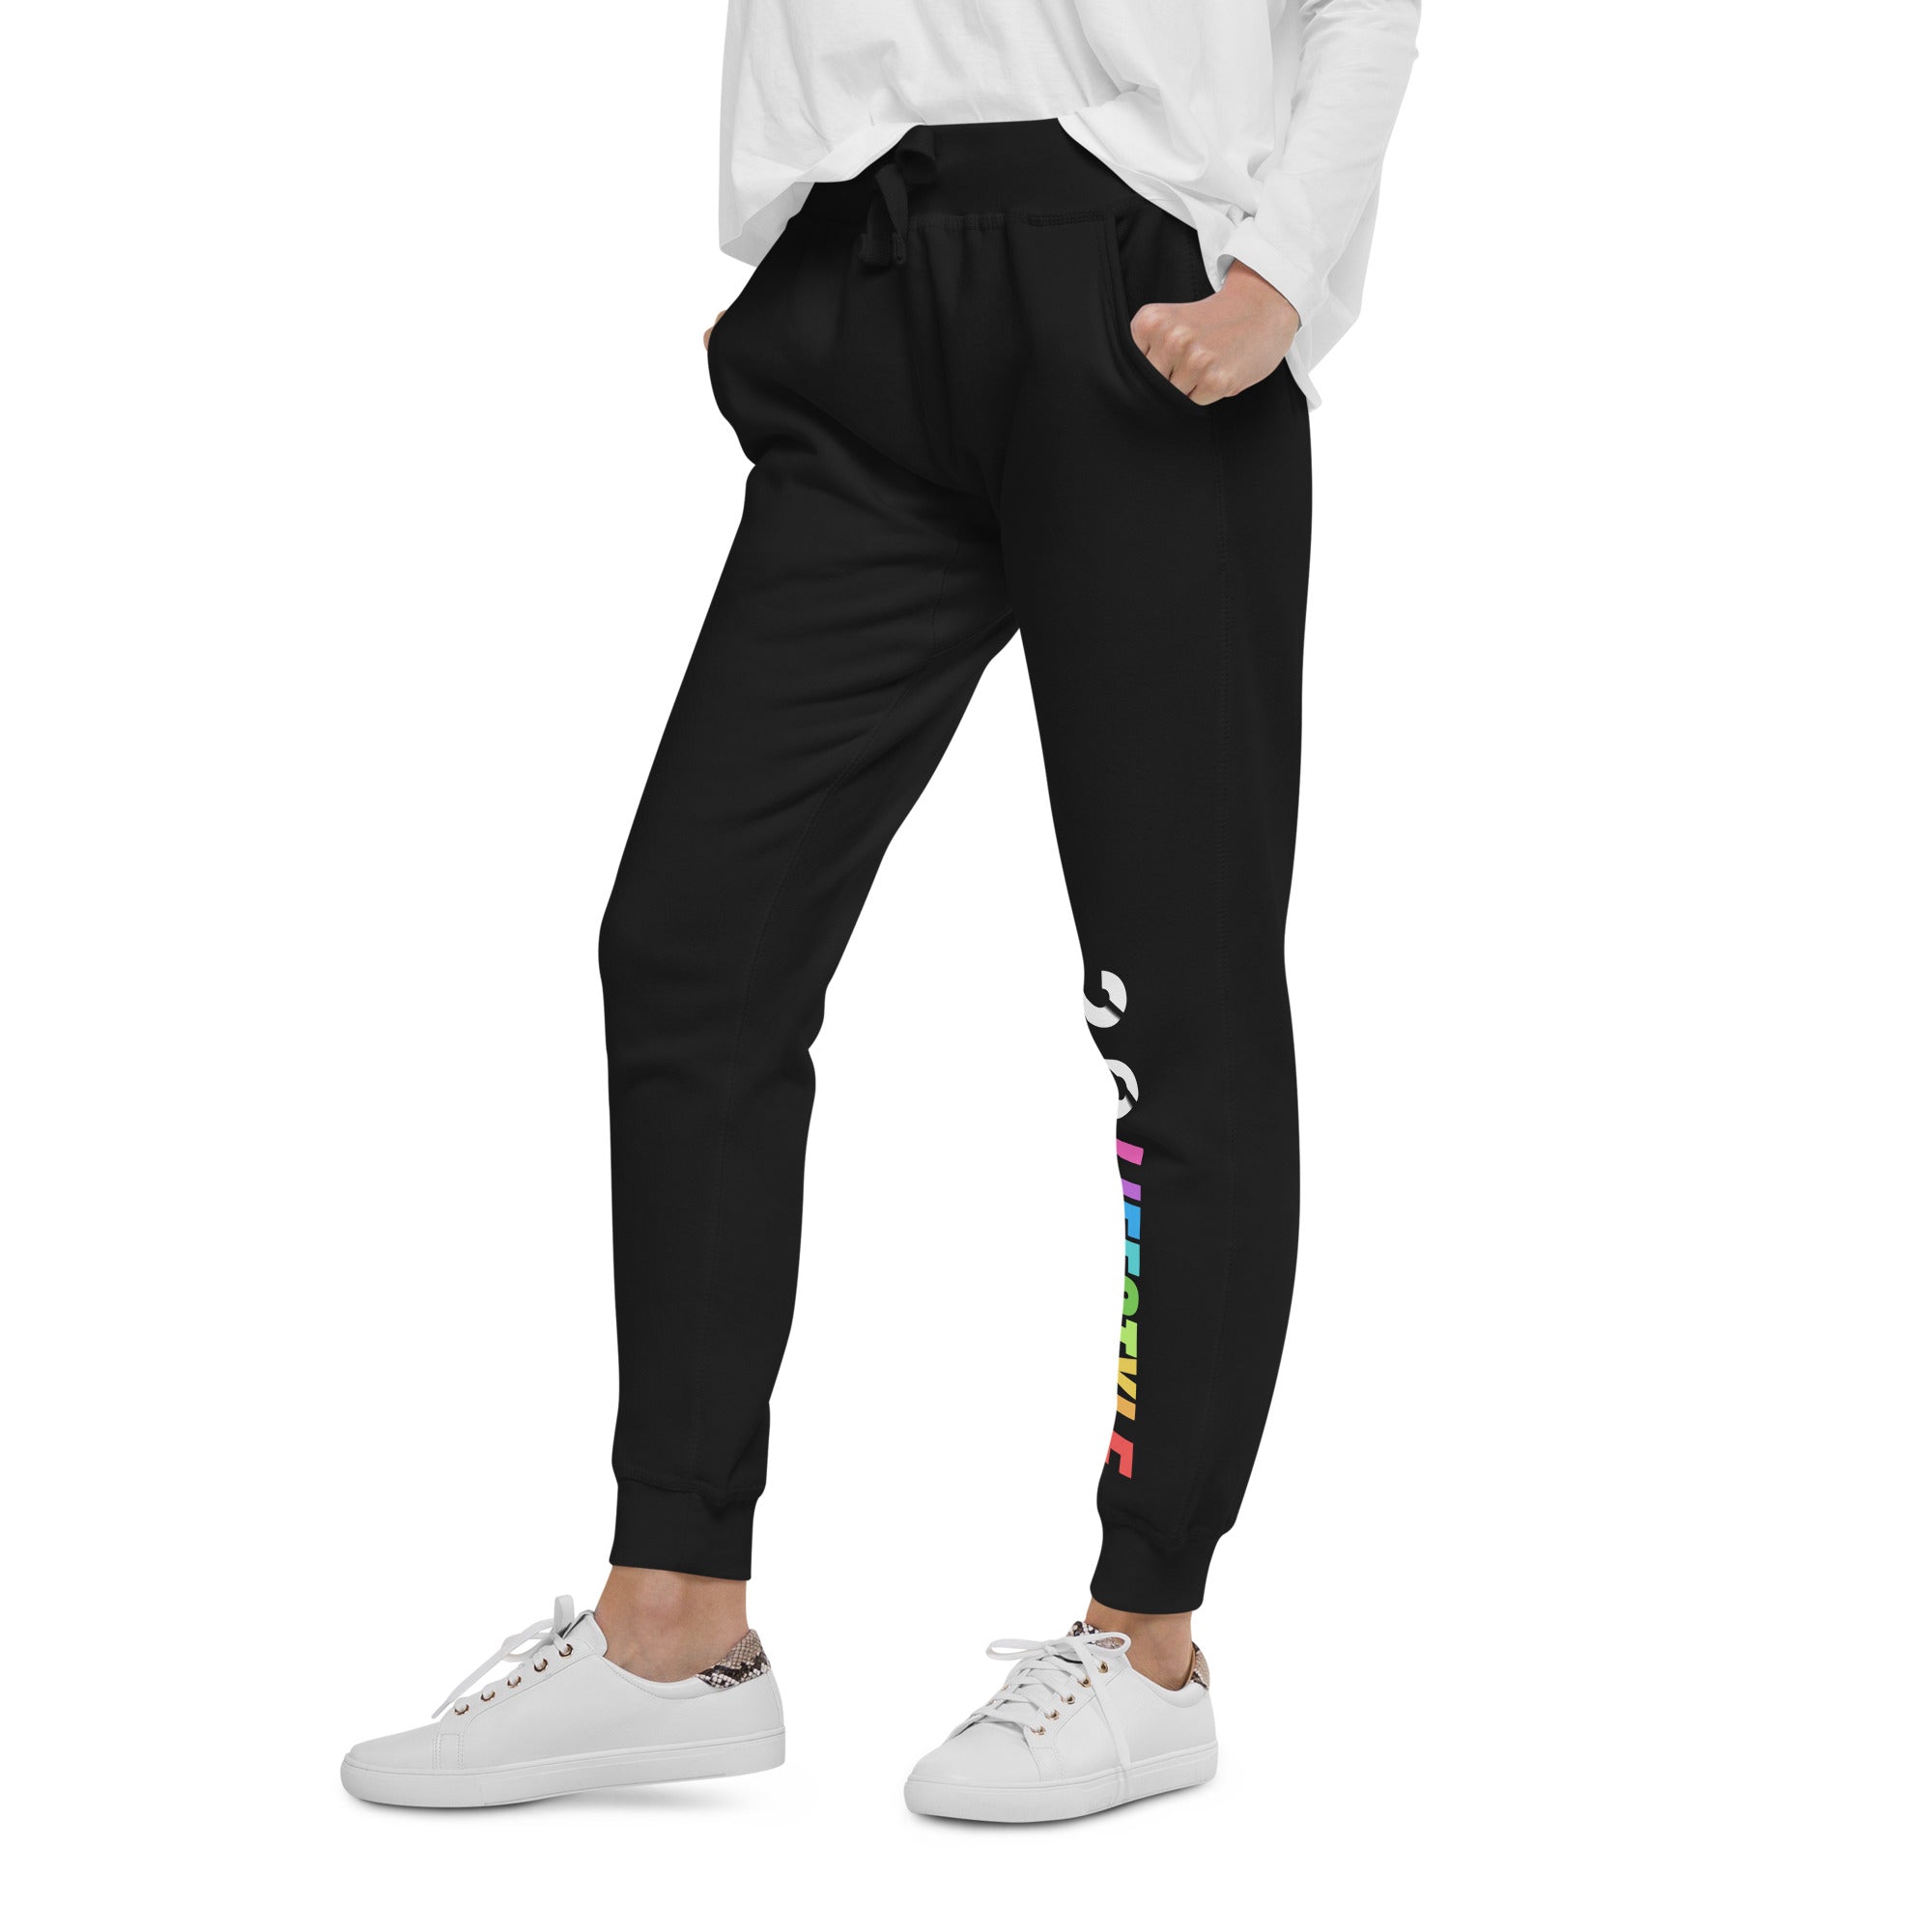 Full of Color Joggers